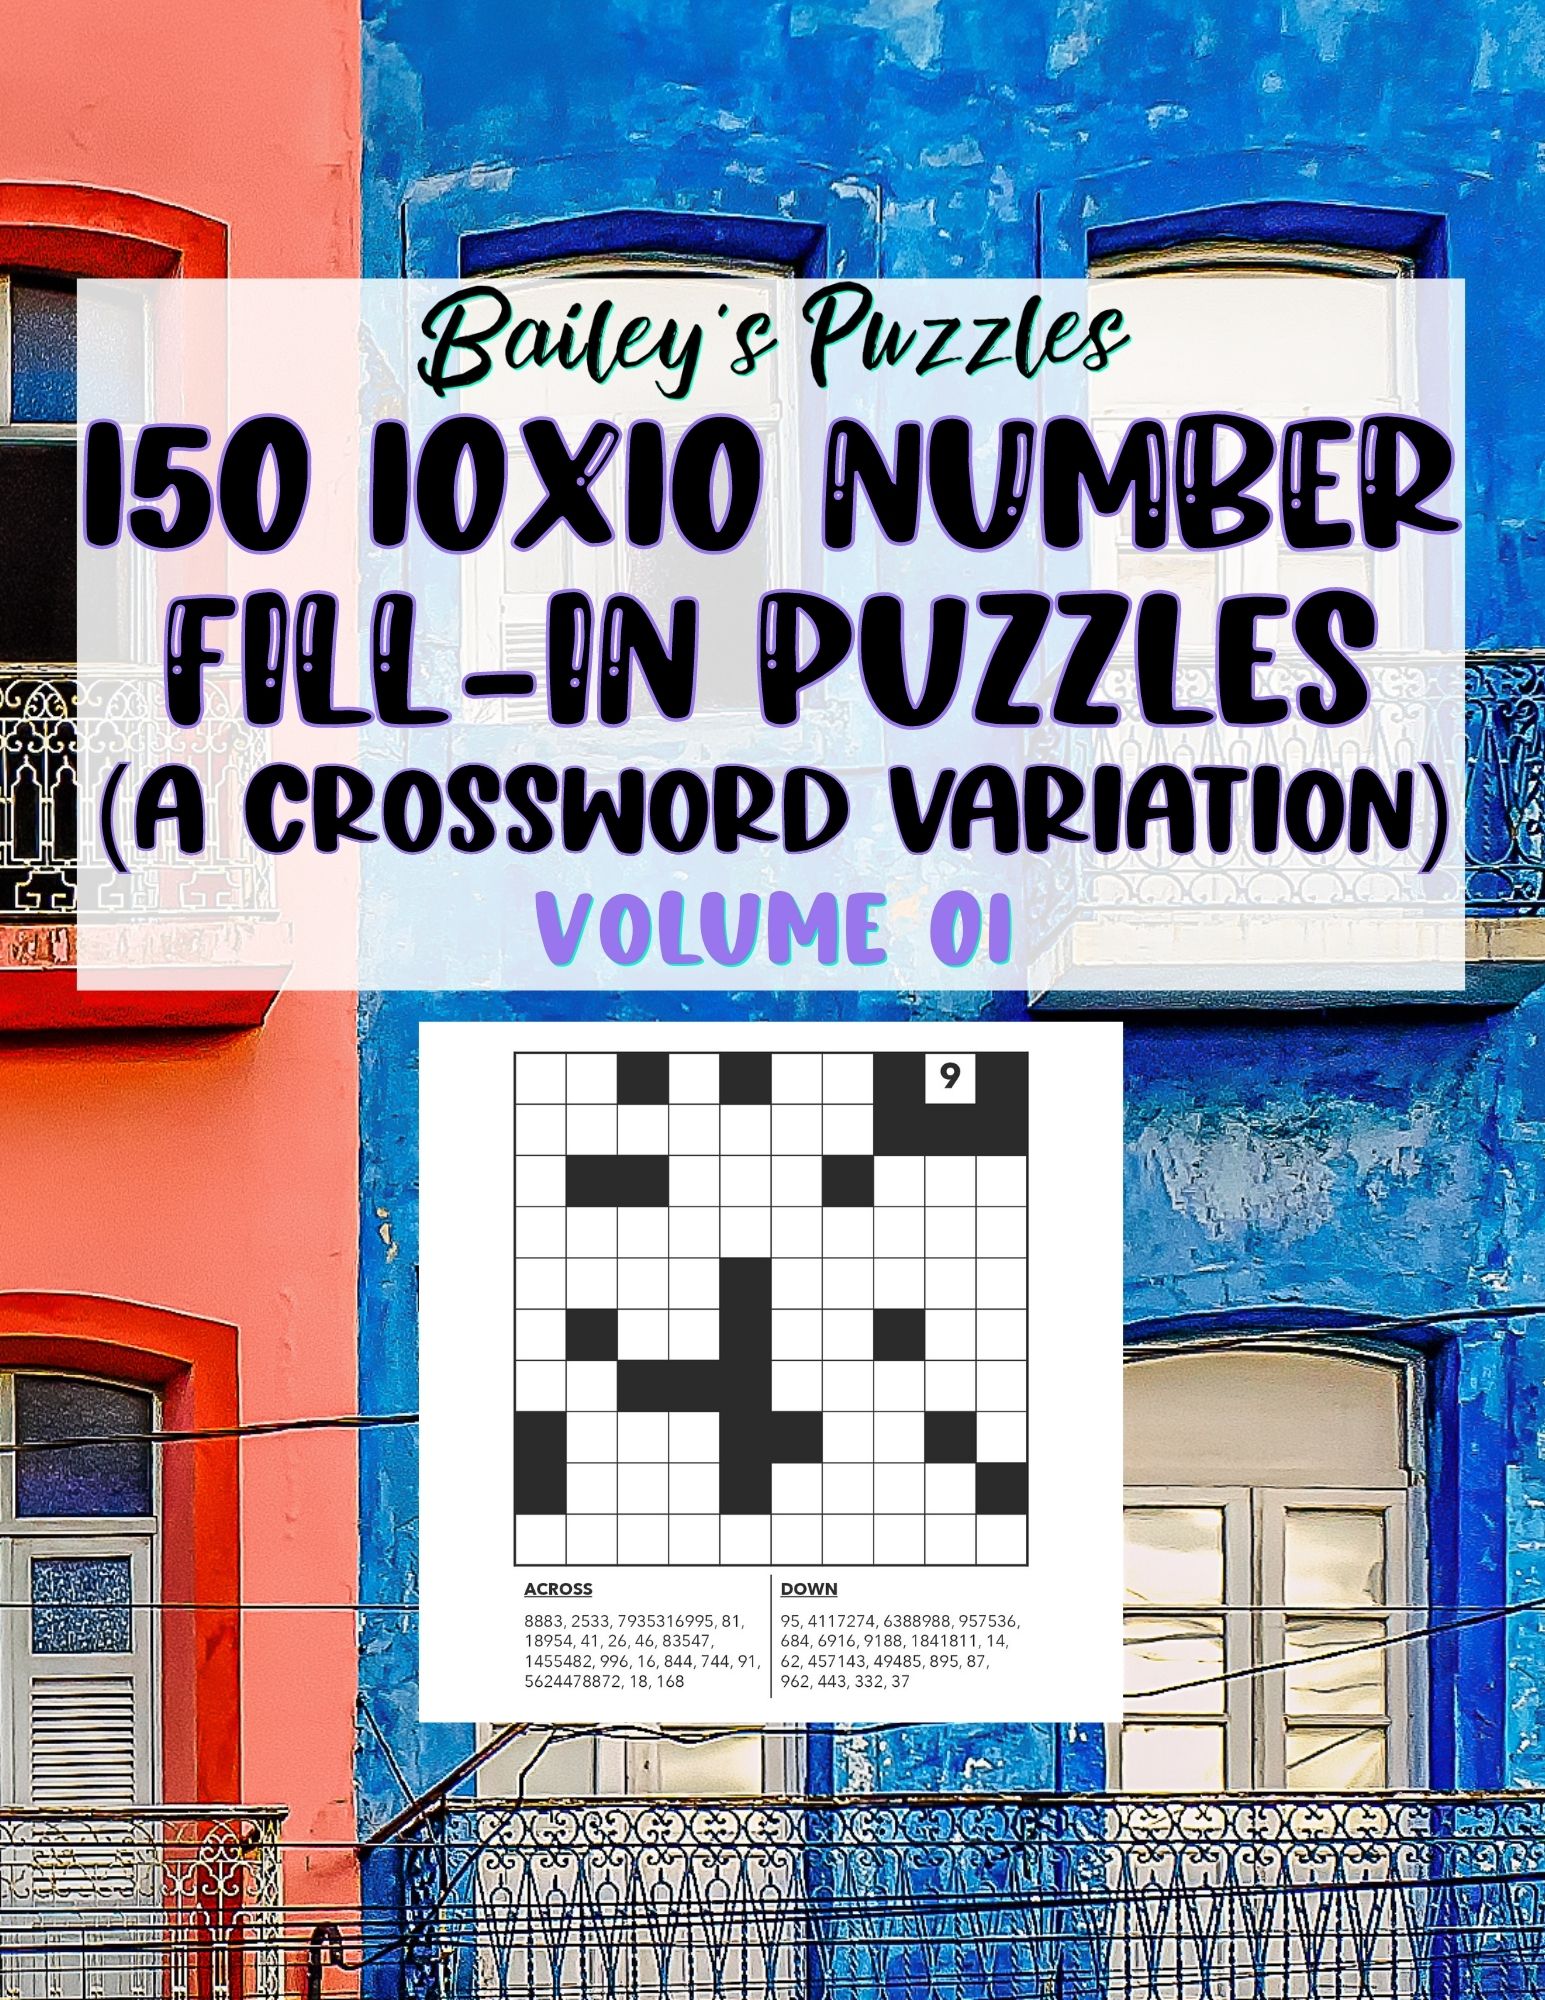 Front Cover - 150 10x10 Number Fill-In Puzzles (a crossword variation): volume 1